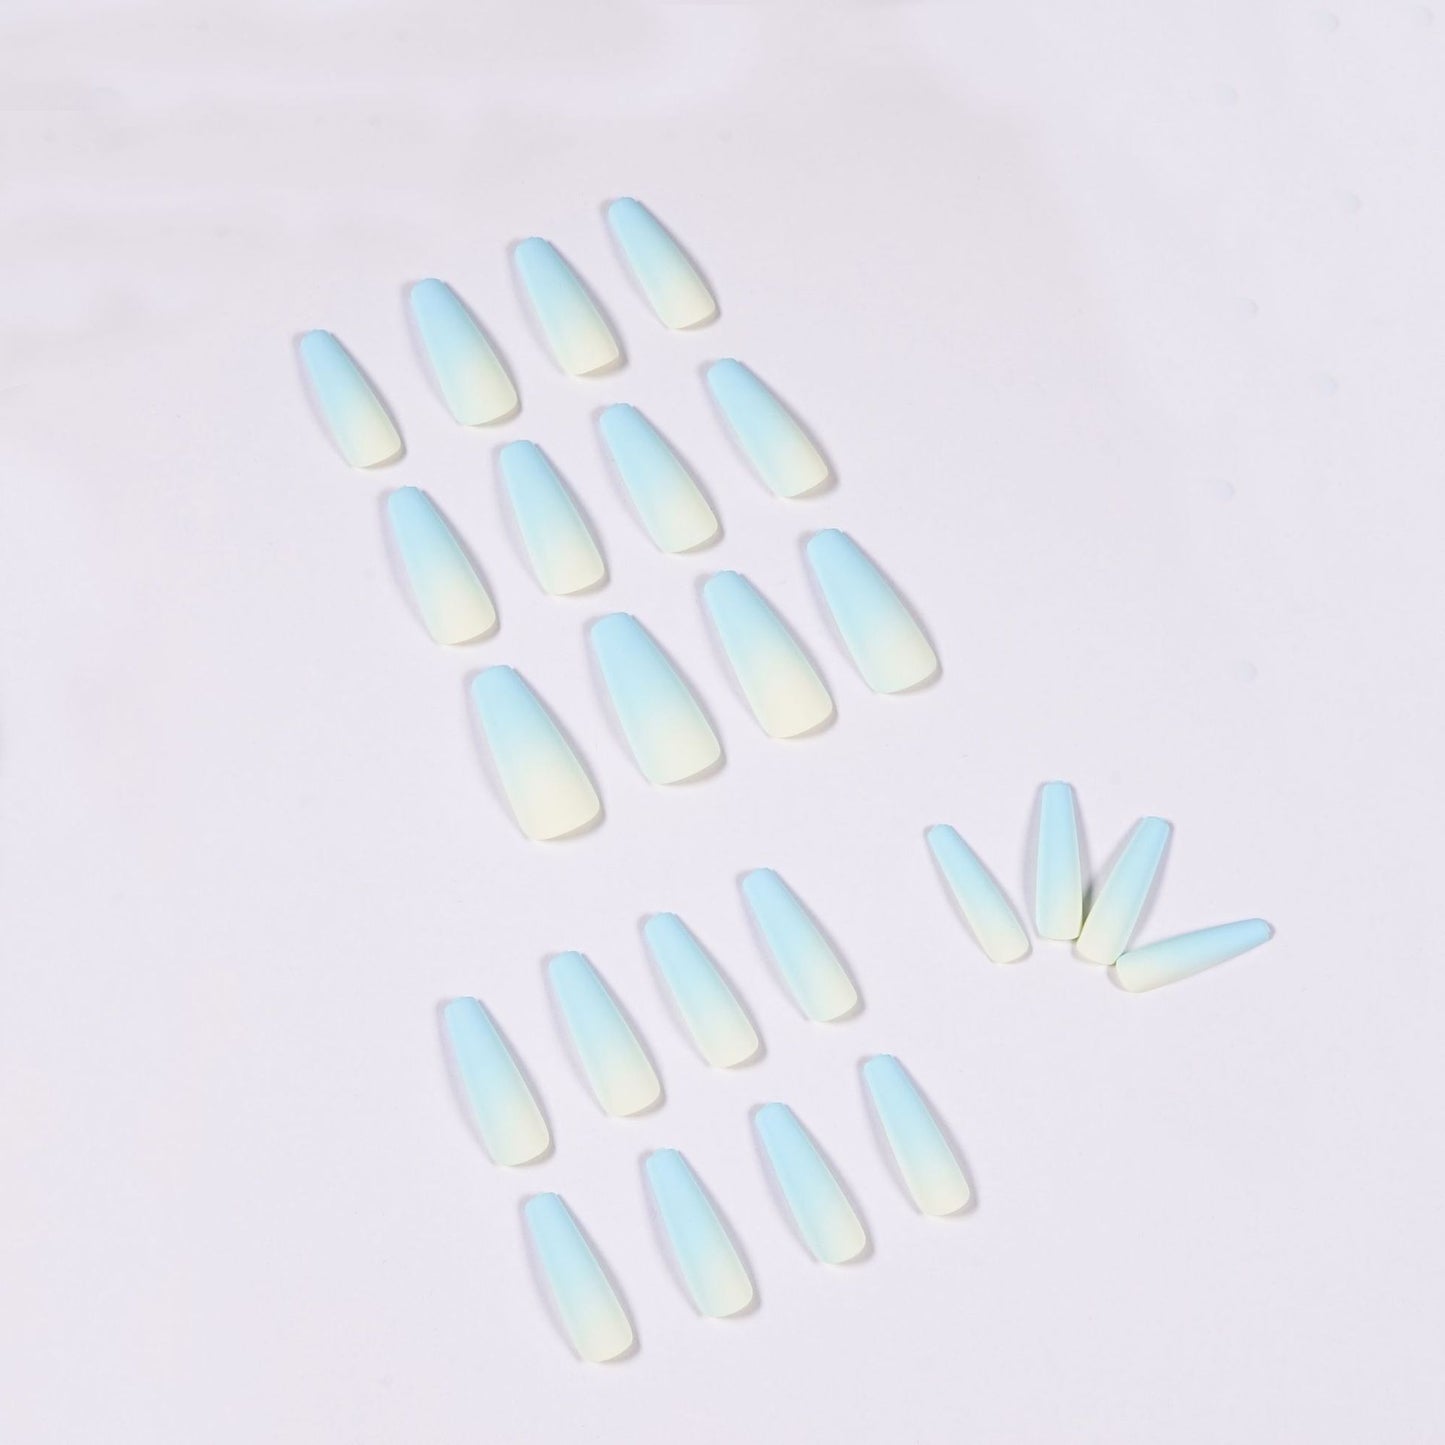 blue ombre nails 70305300-1 lying on white background